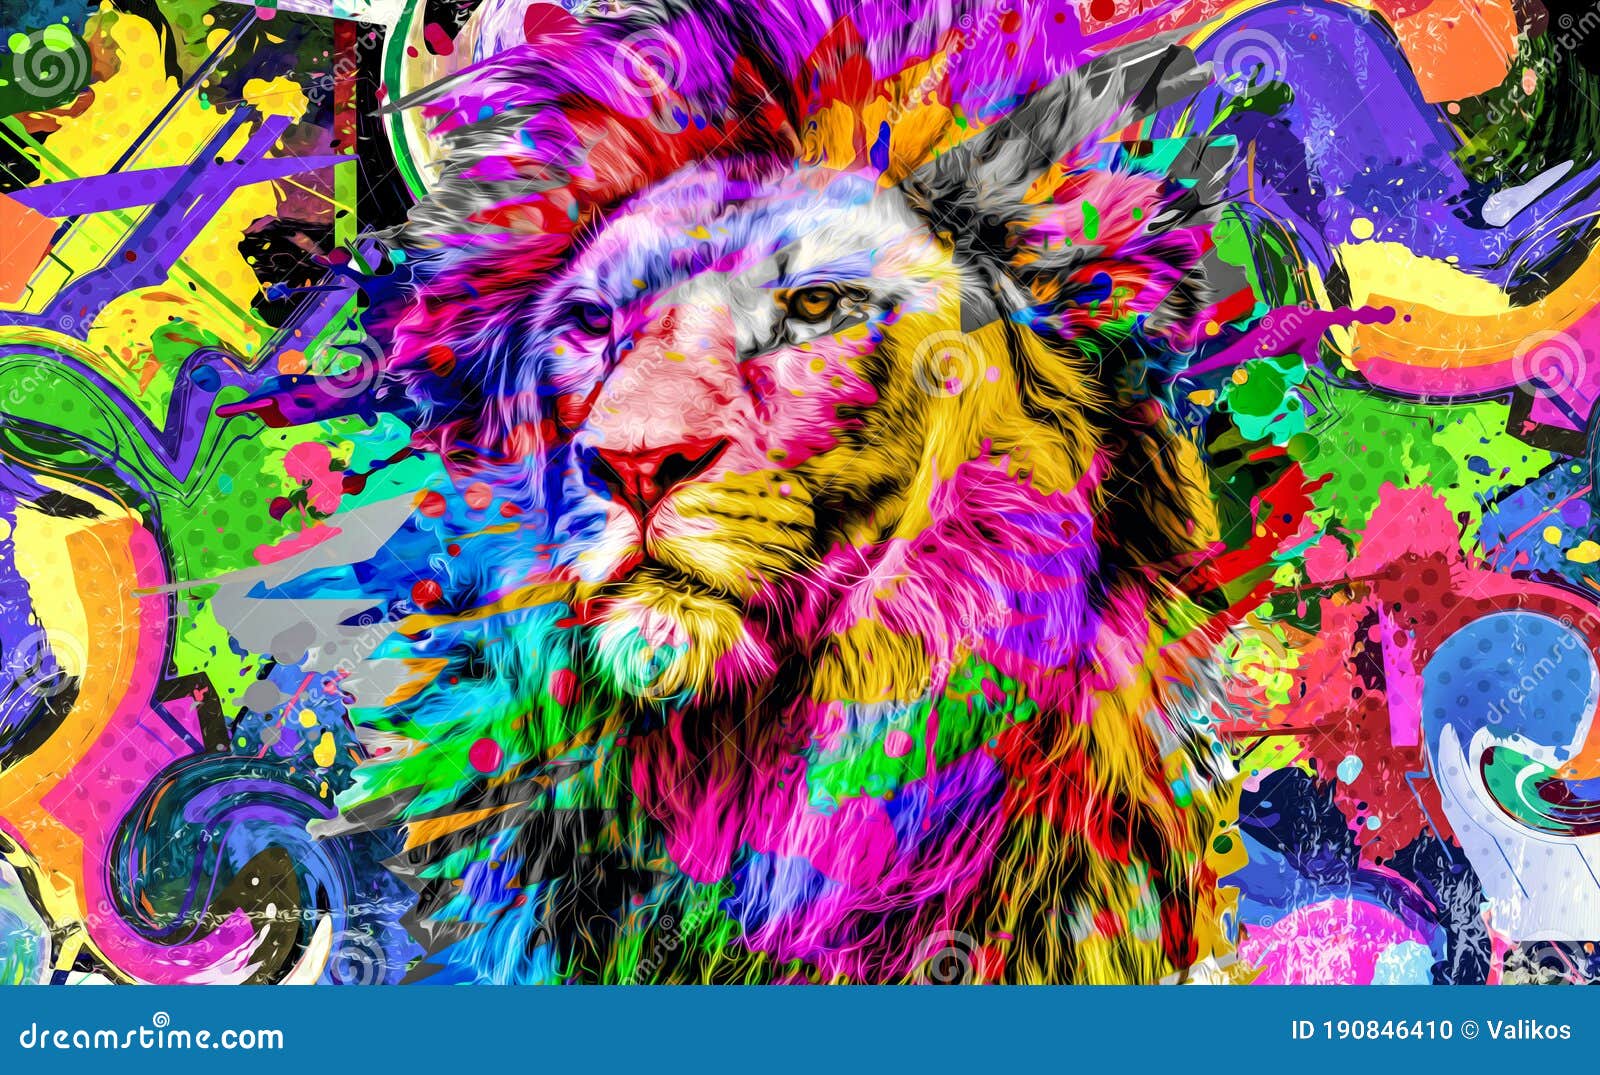 abstract creative  with colorful lion